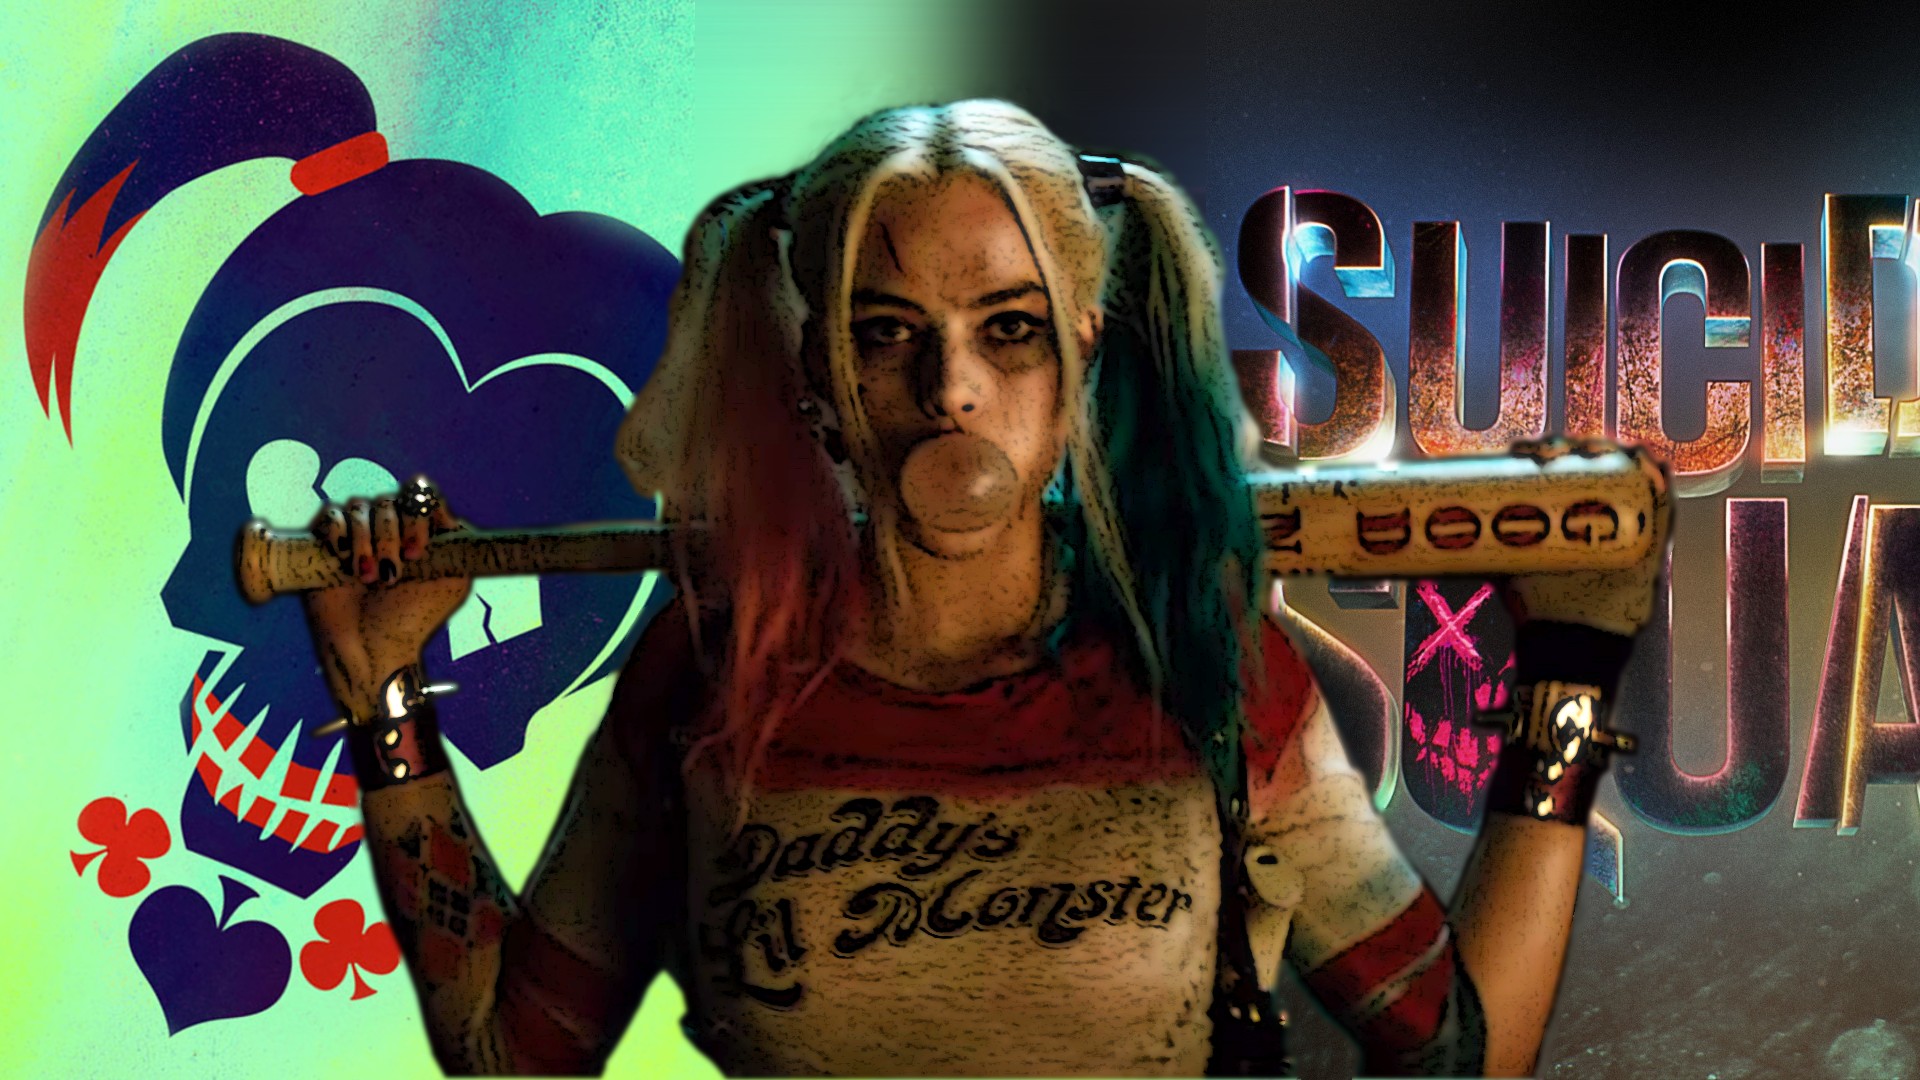 HD Wallpaper Harley Quinn Movie with image resolution 1920x1080 pixel. You can make this wallpaper for your Desktop Computer Backgrounds, Mac Wallpapers, Android Lock screen or iPhone Screensavers